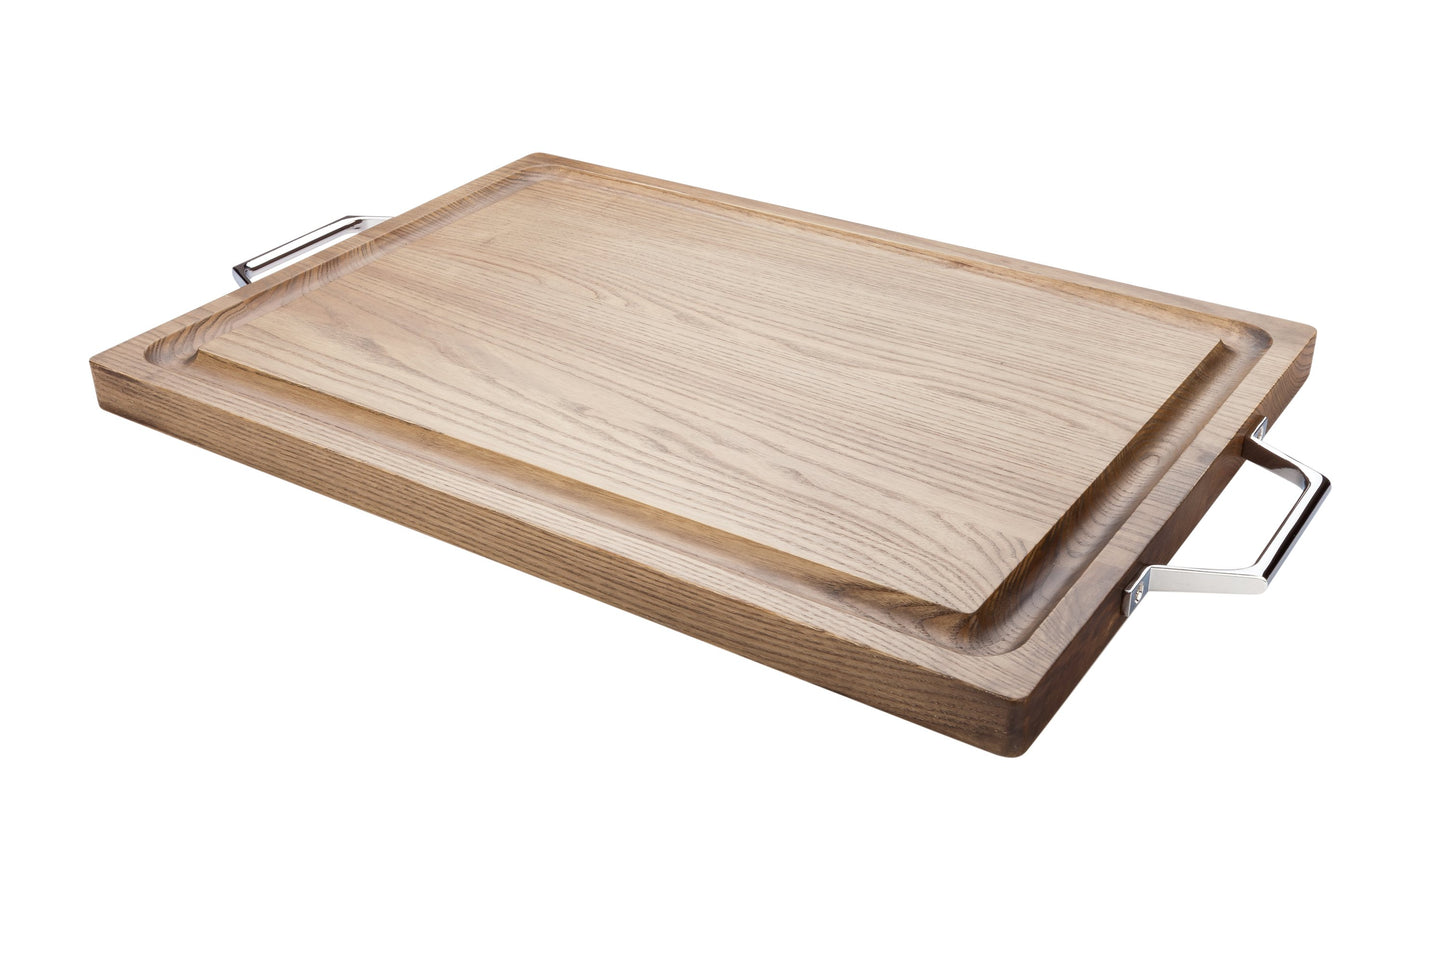 Campagna Small Serving and Cutting Board in Platinum Ash Wood with Chrome Hardware 21.5 inches 1 count box